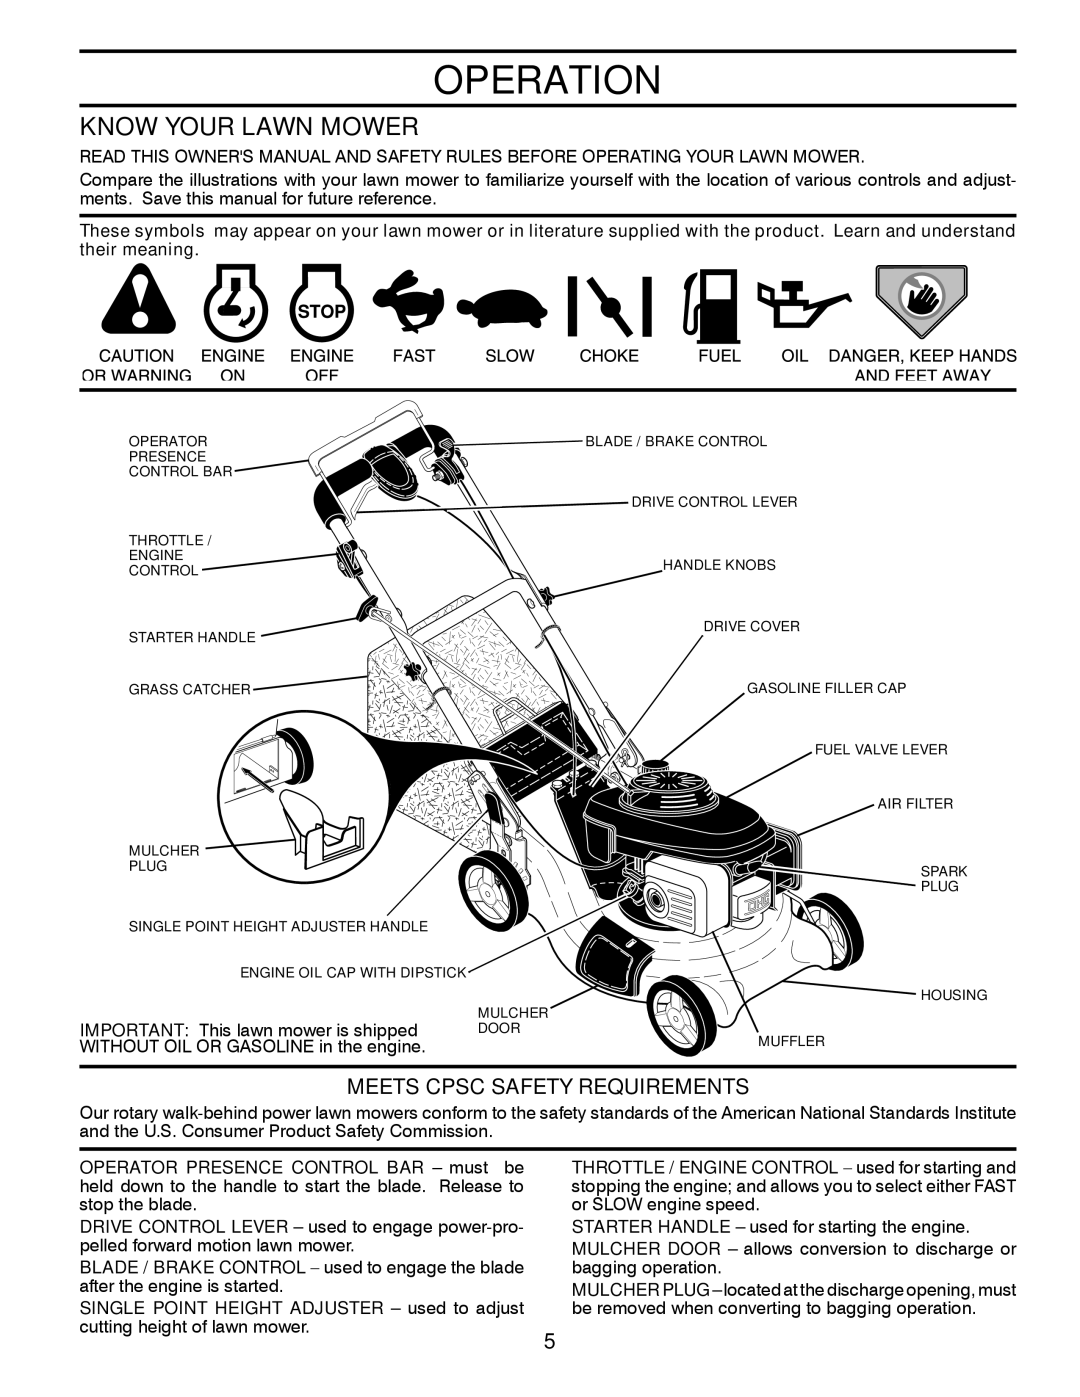 Husqvarna 7021RB owner manual Operation, Know Your Lawn Mower, Meets Cpsc Safety Requirements 